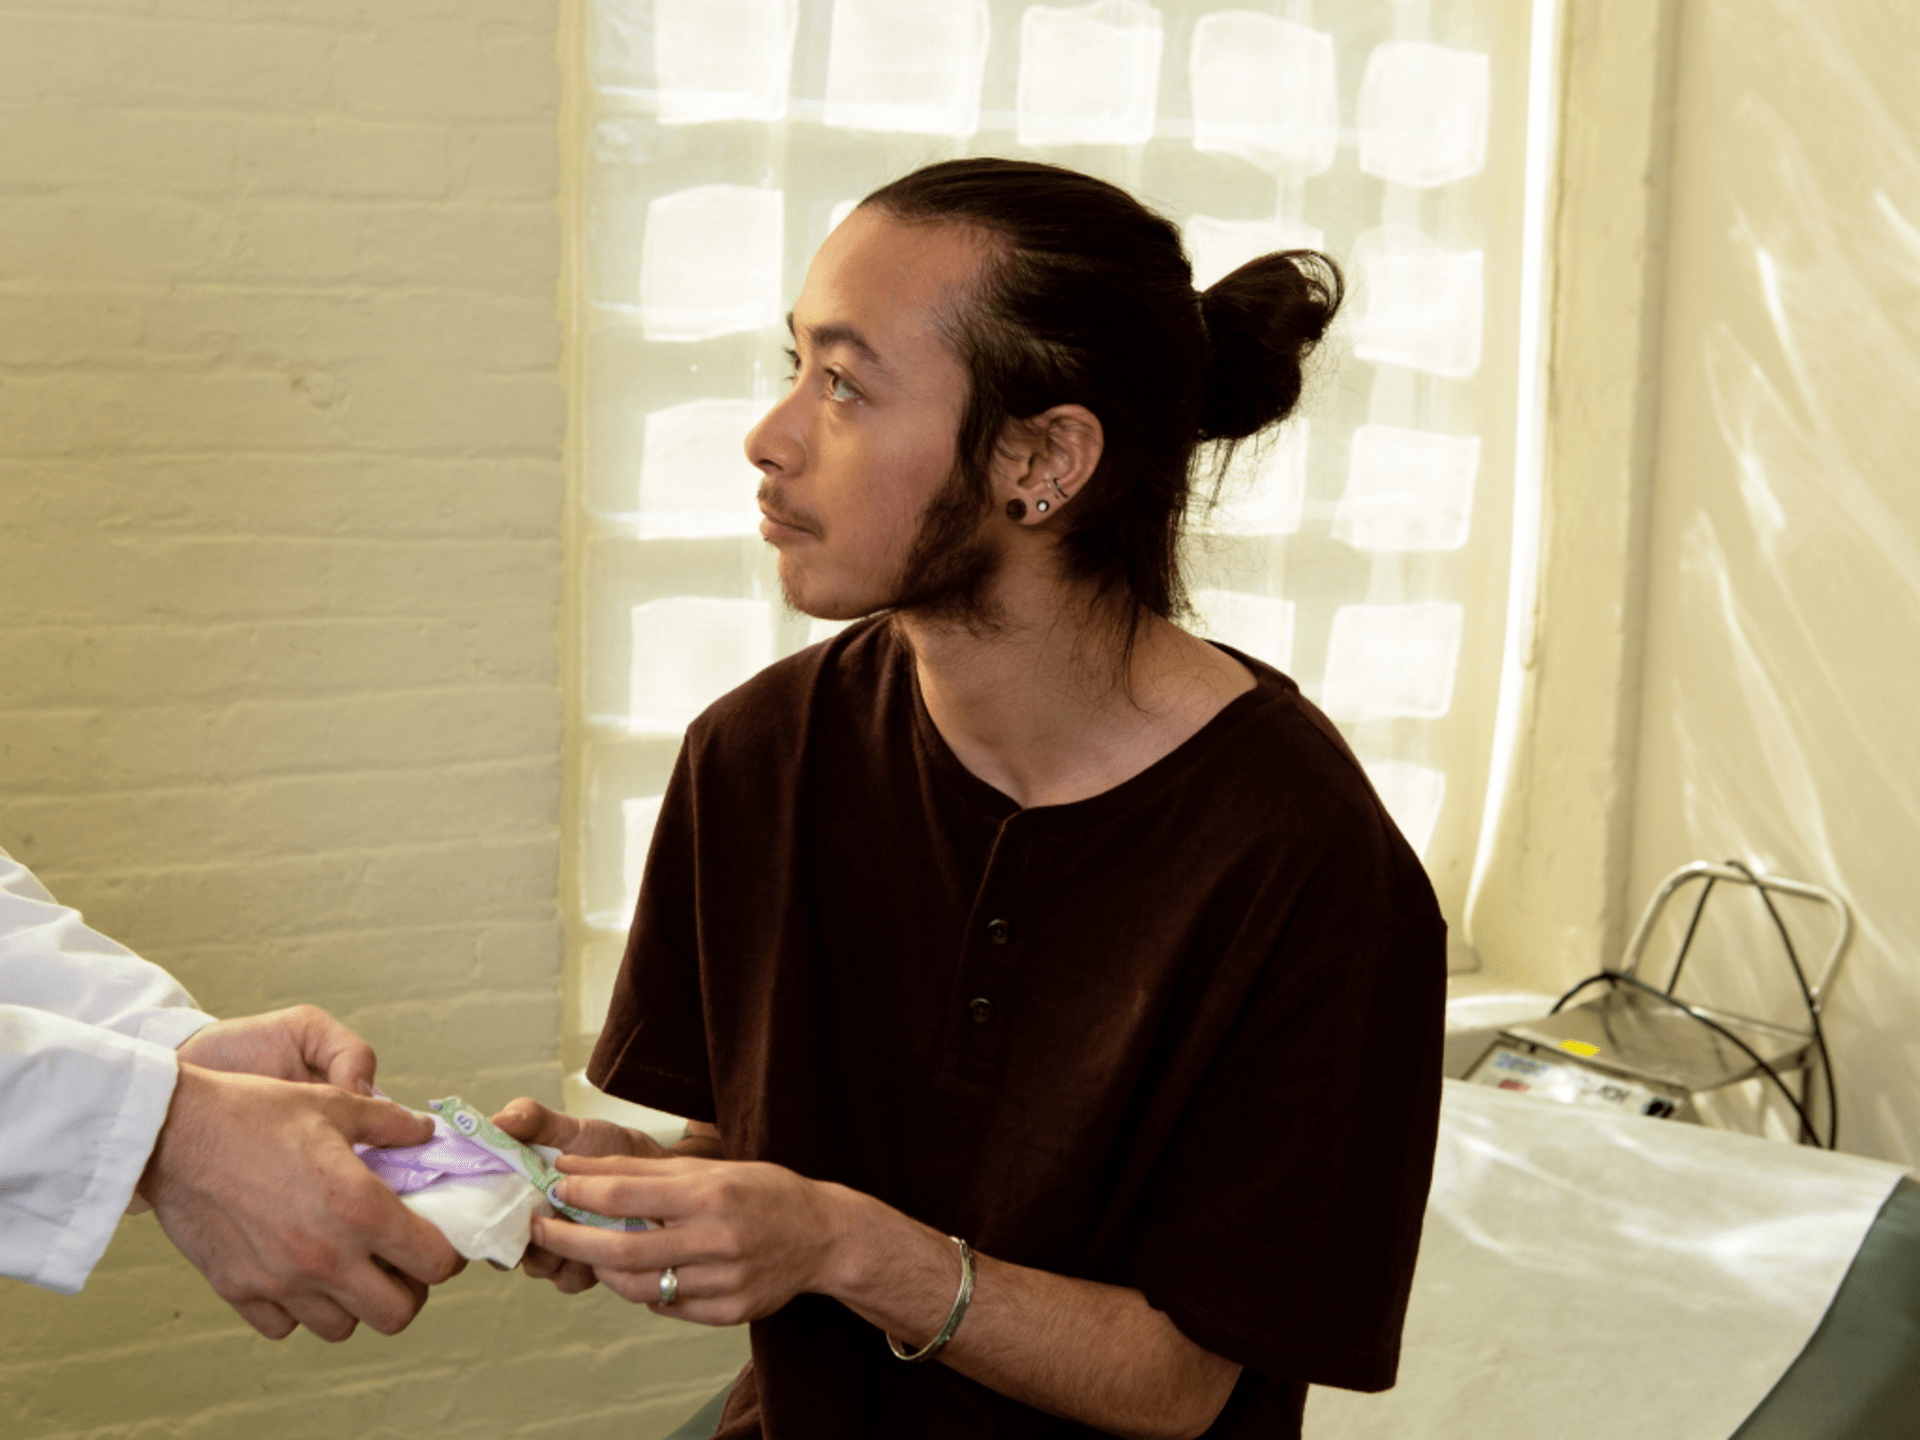 A genderqueer person receiving products from a doctor